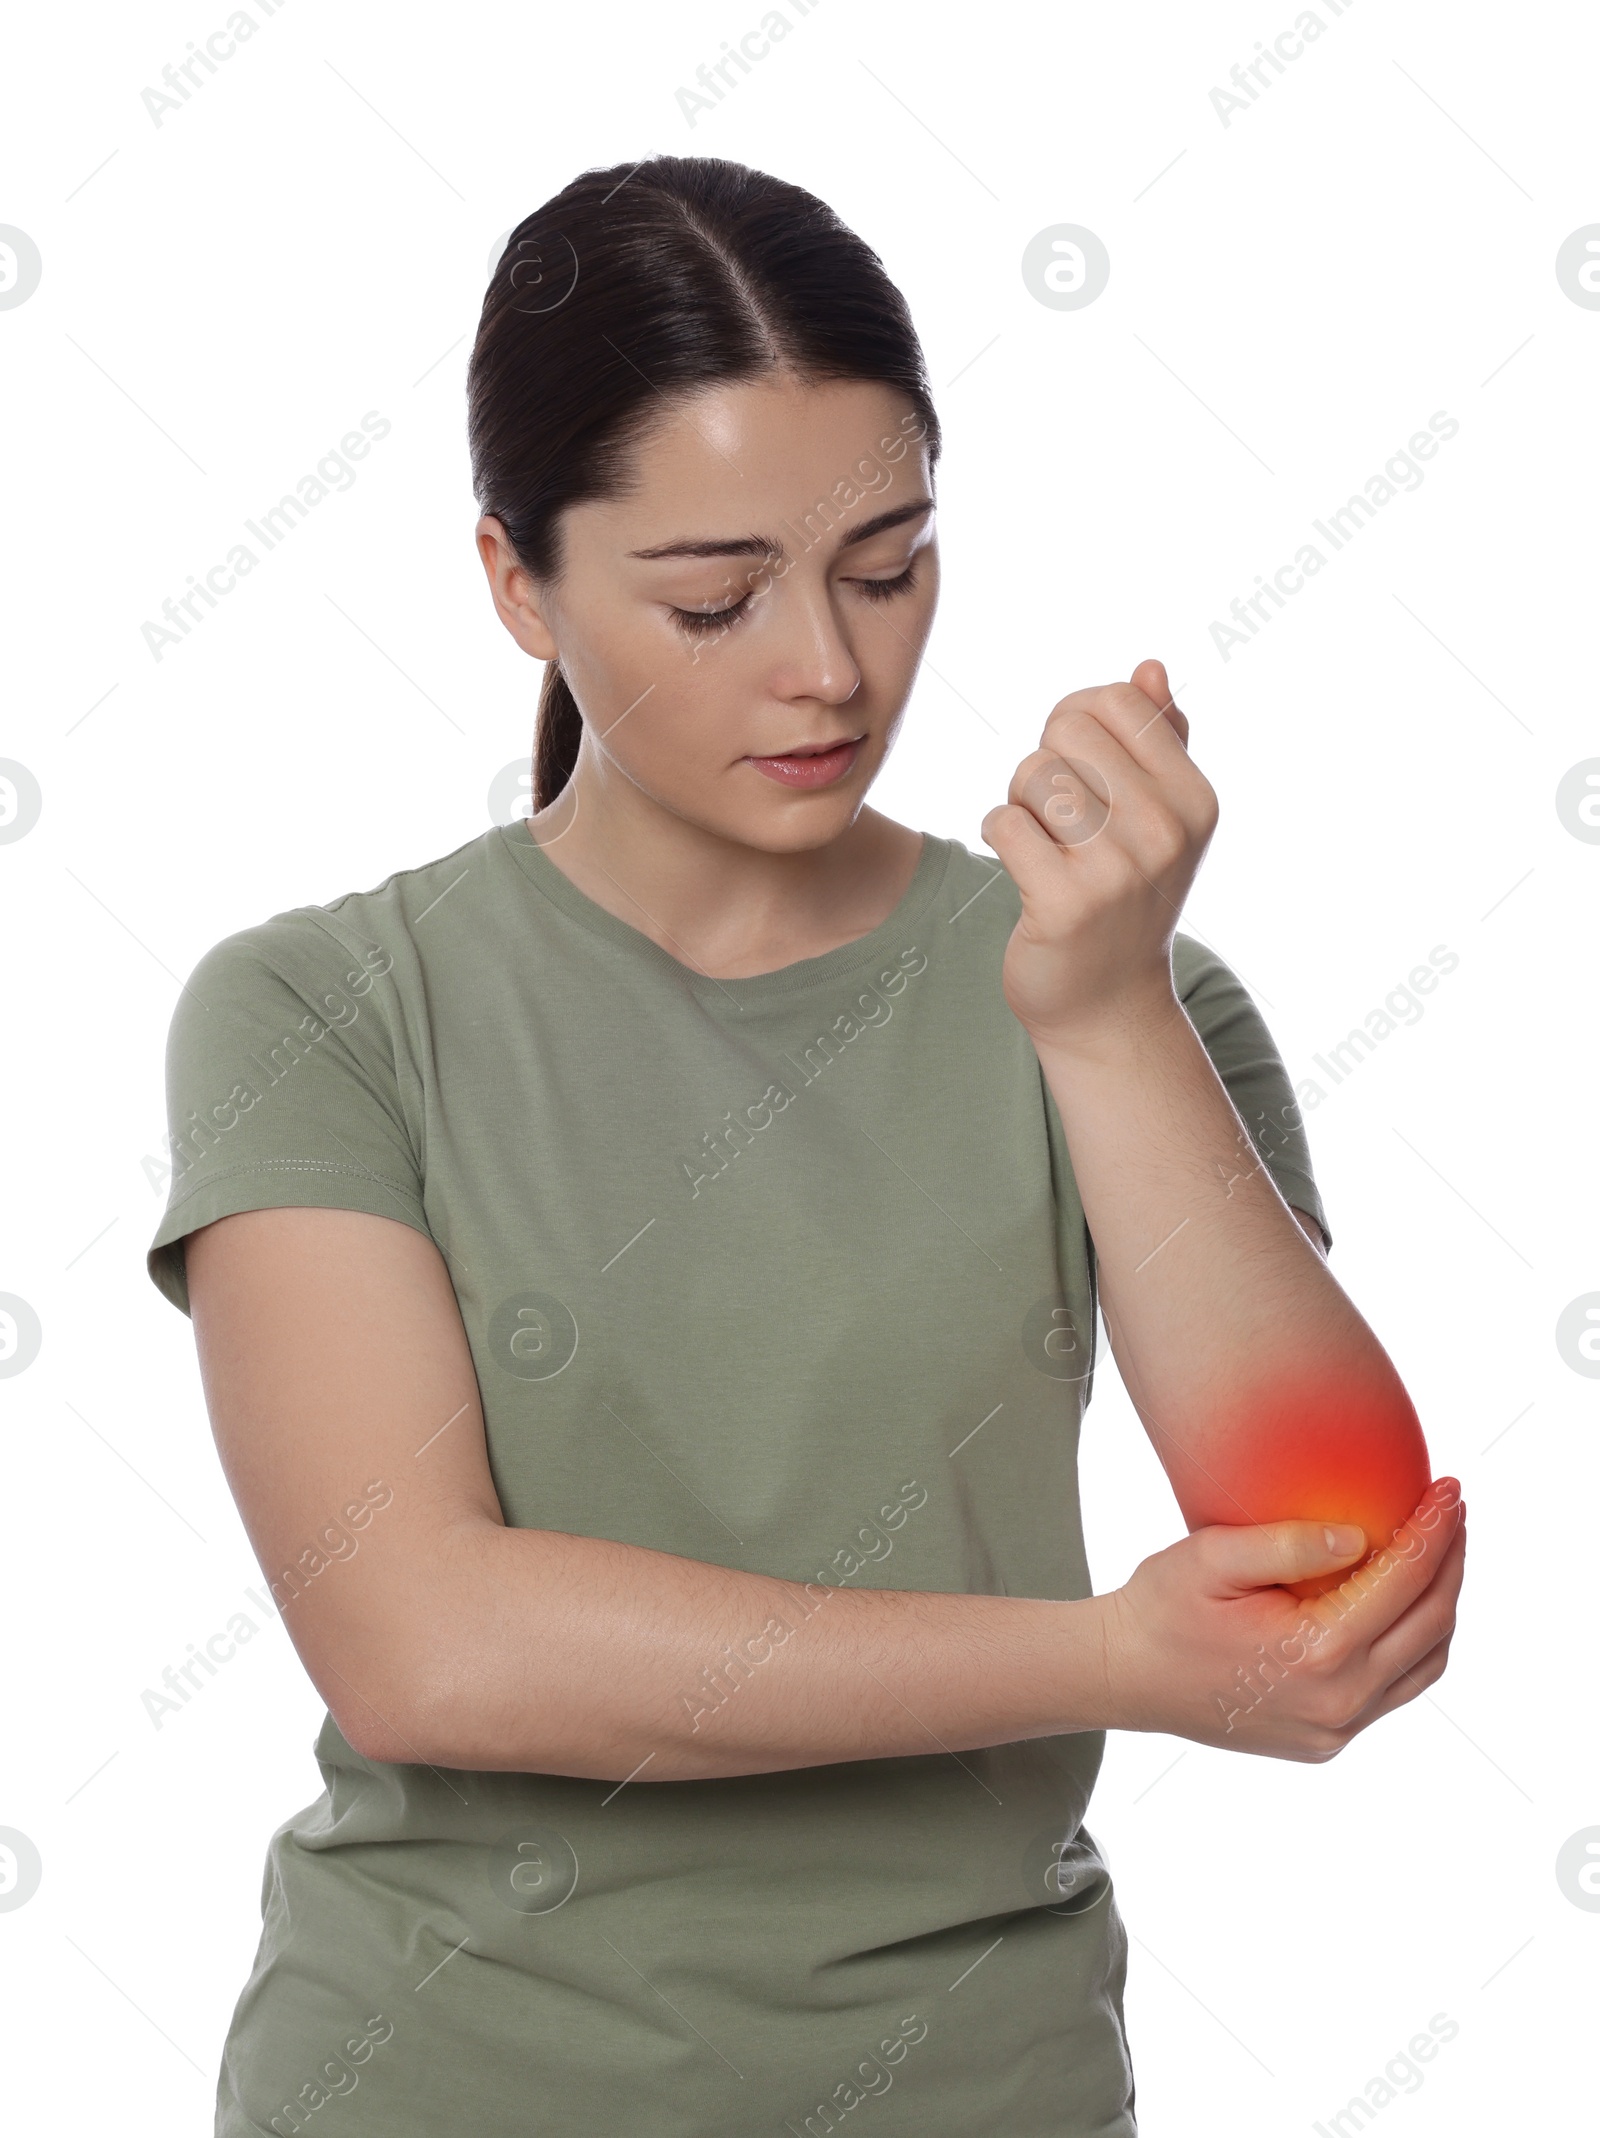 Image of Arthritis symptoms. Woman suffering from pain in elbow on white background